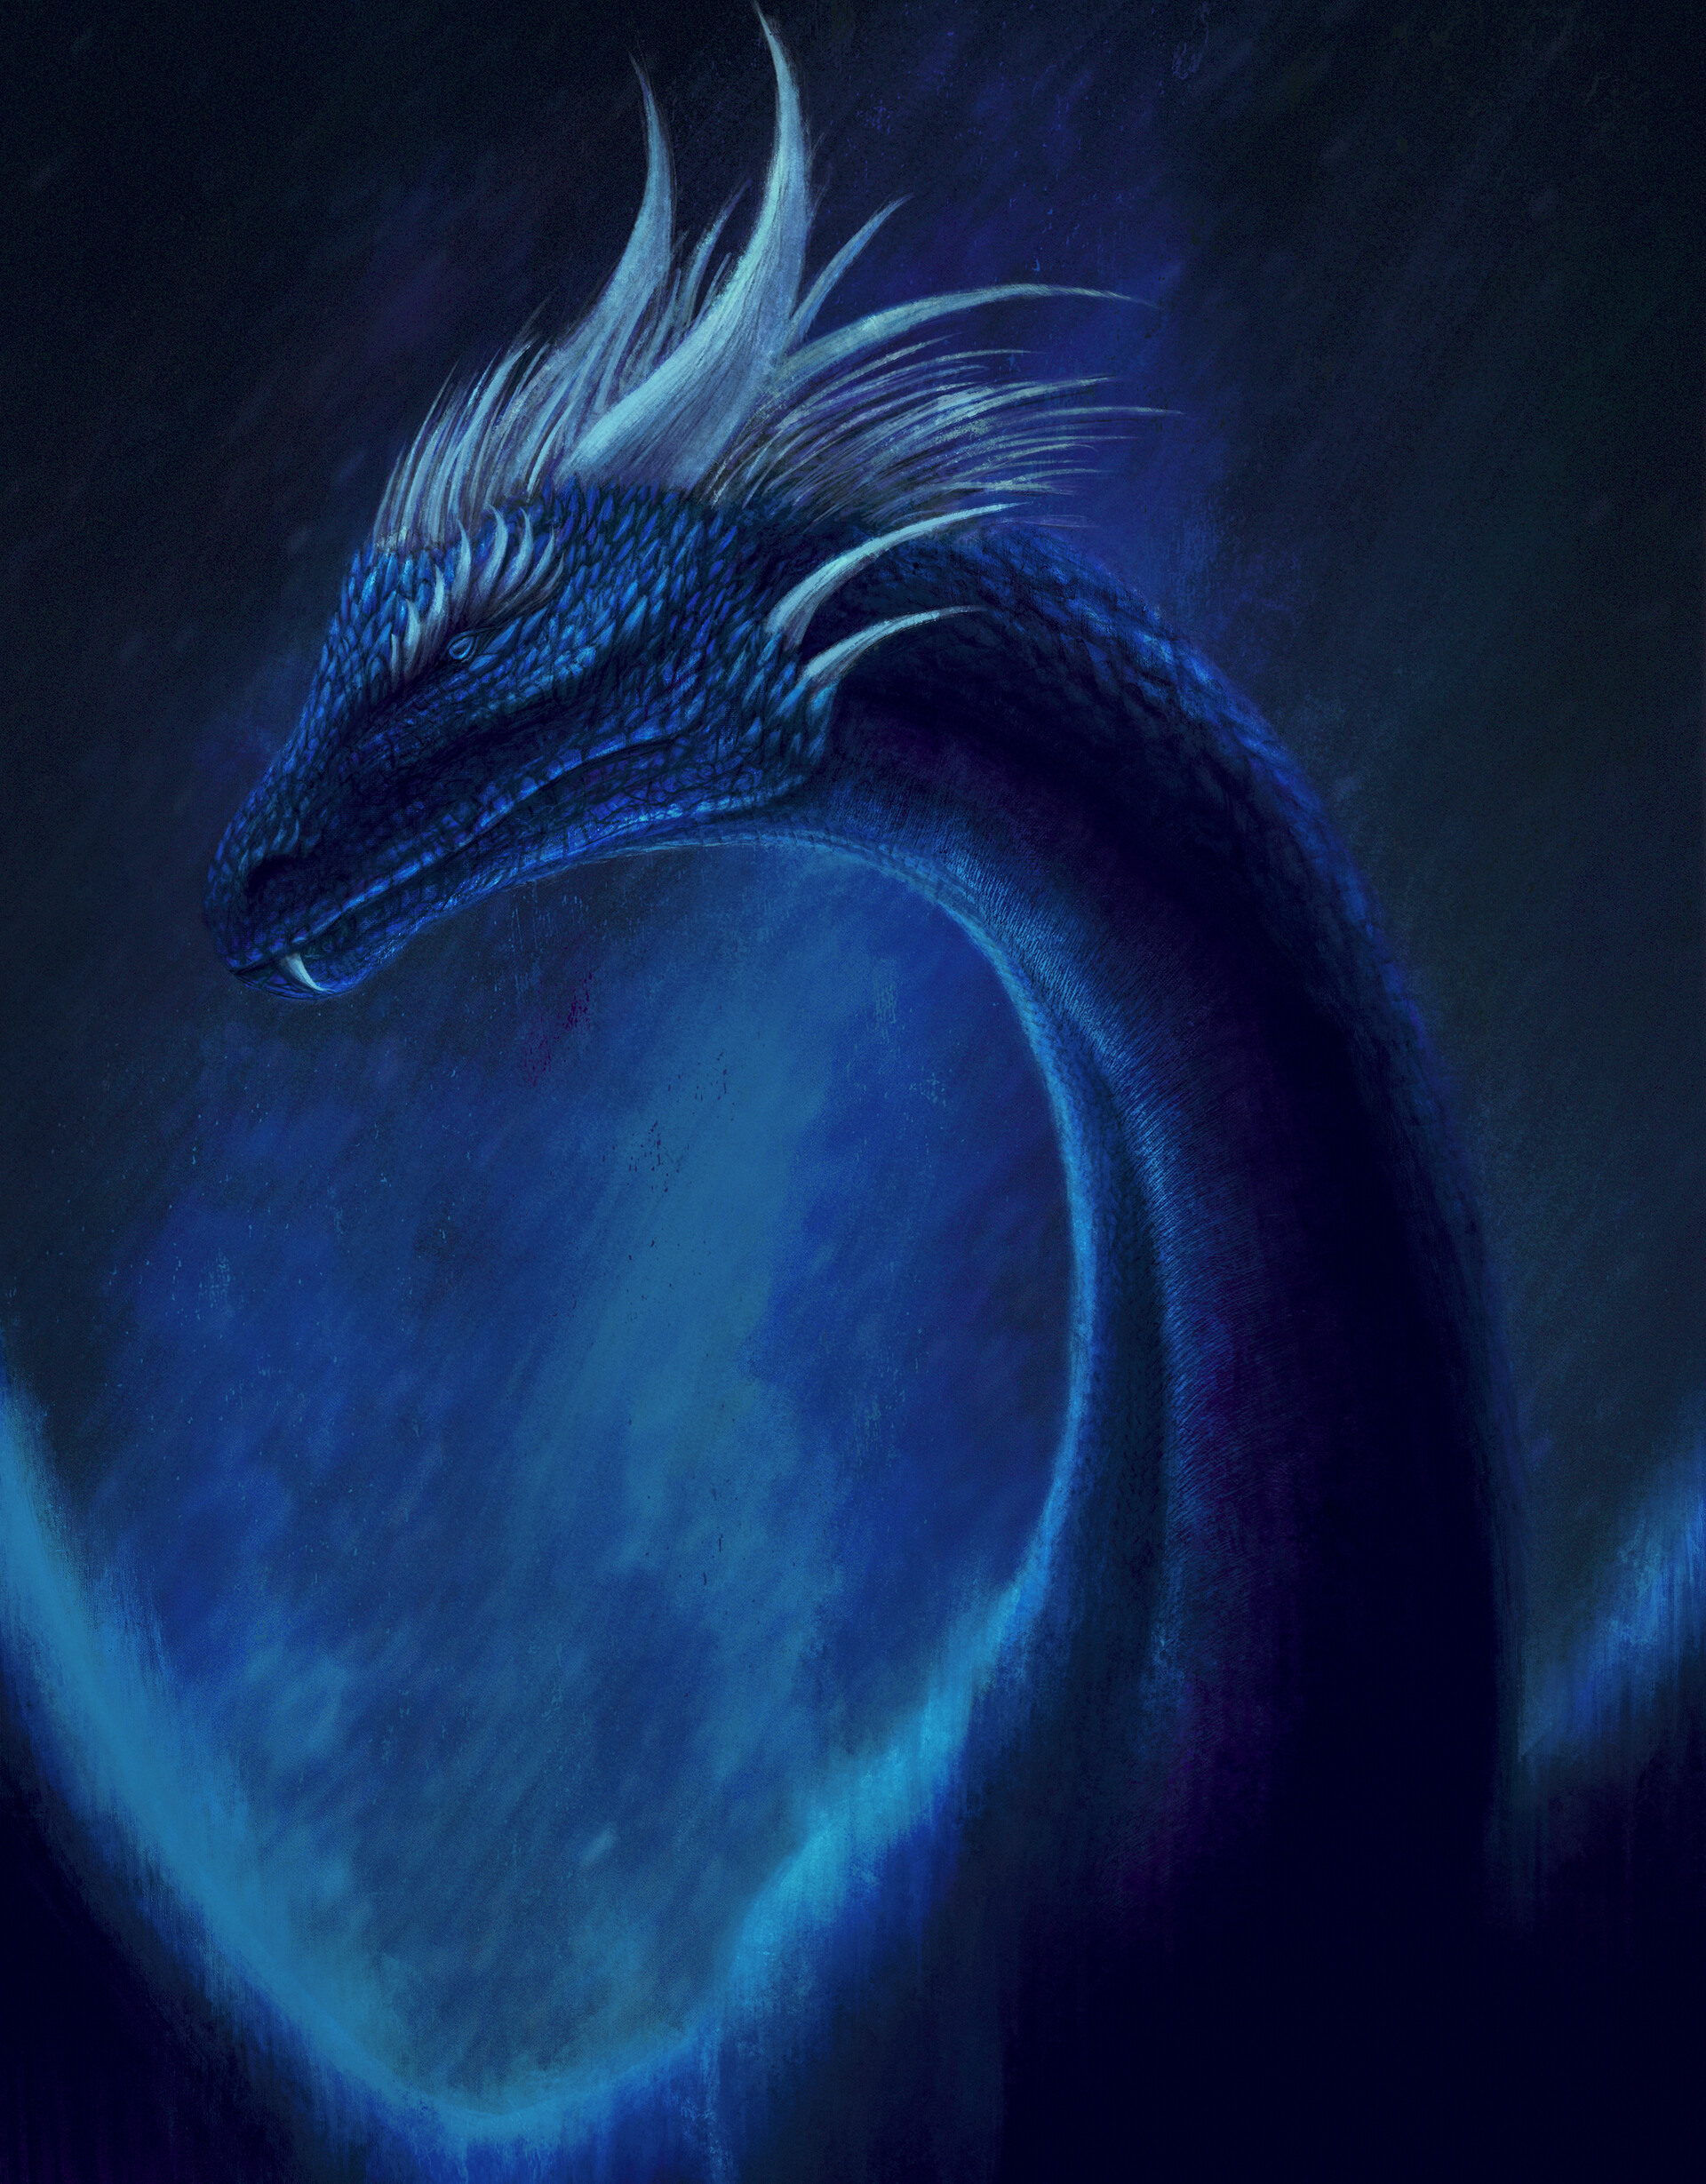 dragon, art, blue, being, creature, fiction, that's incredible